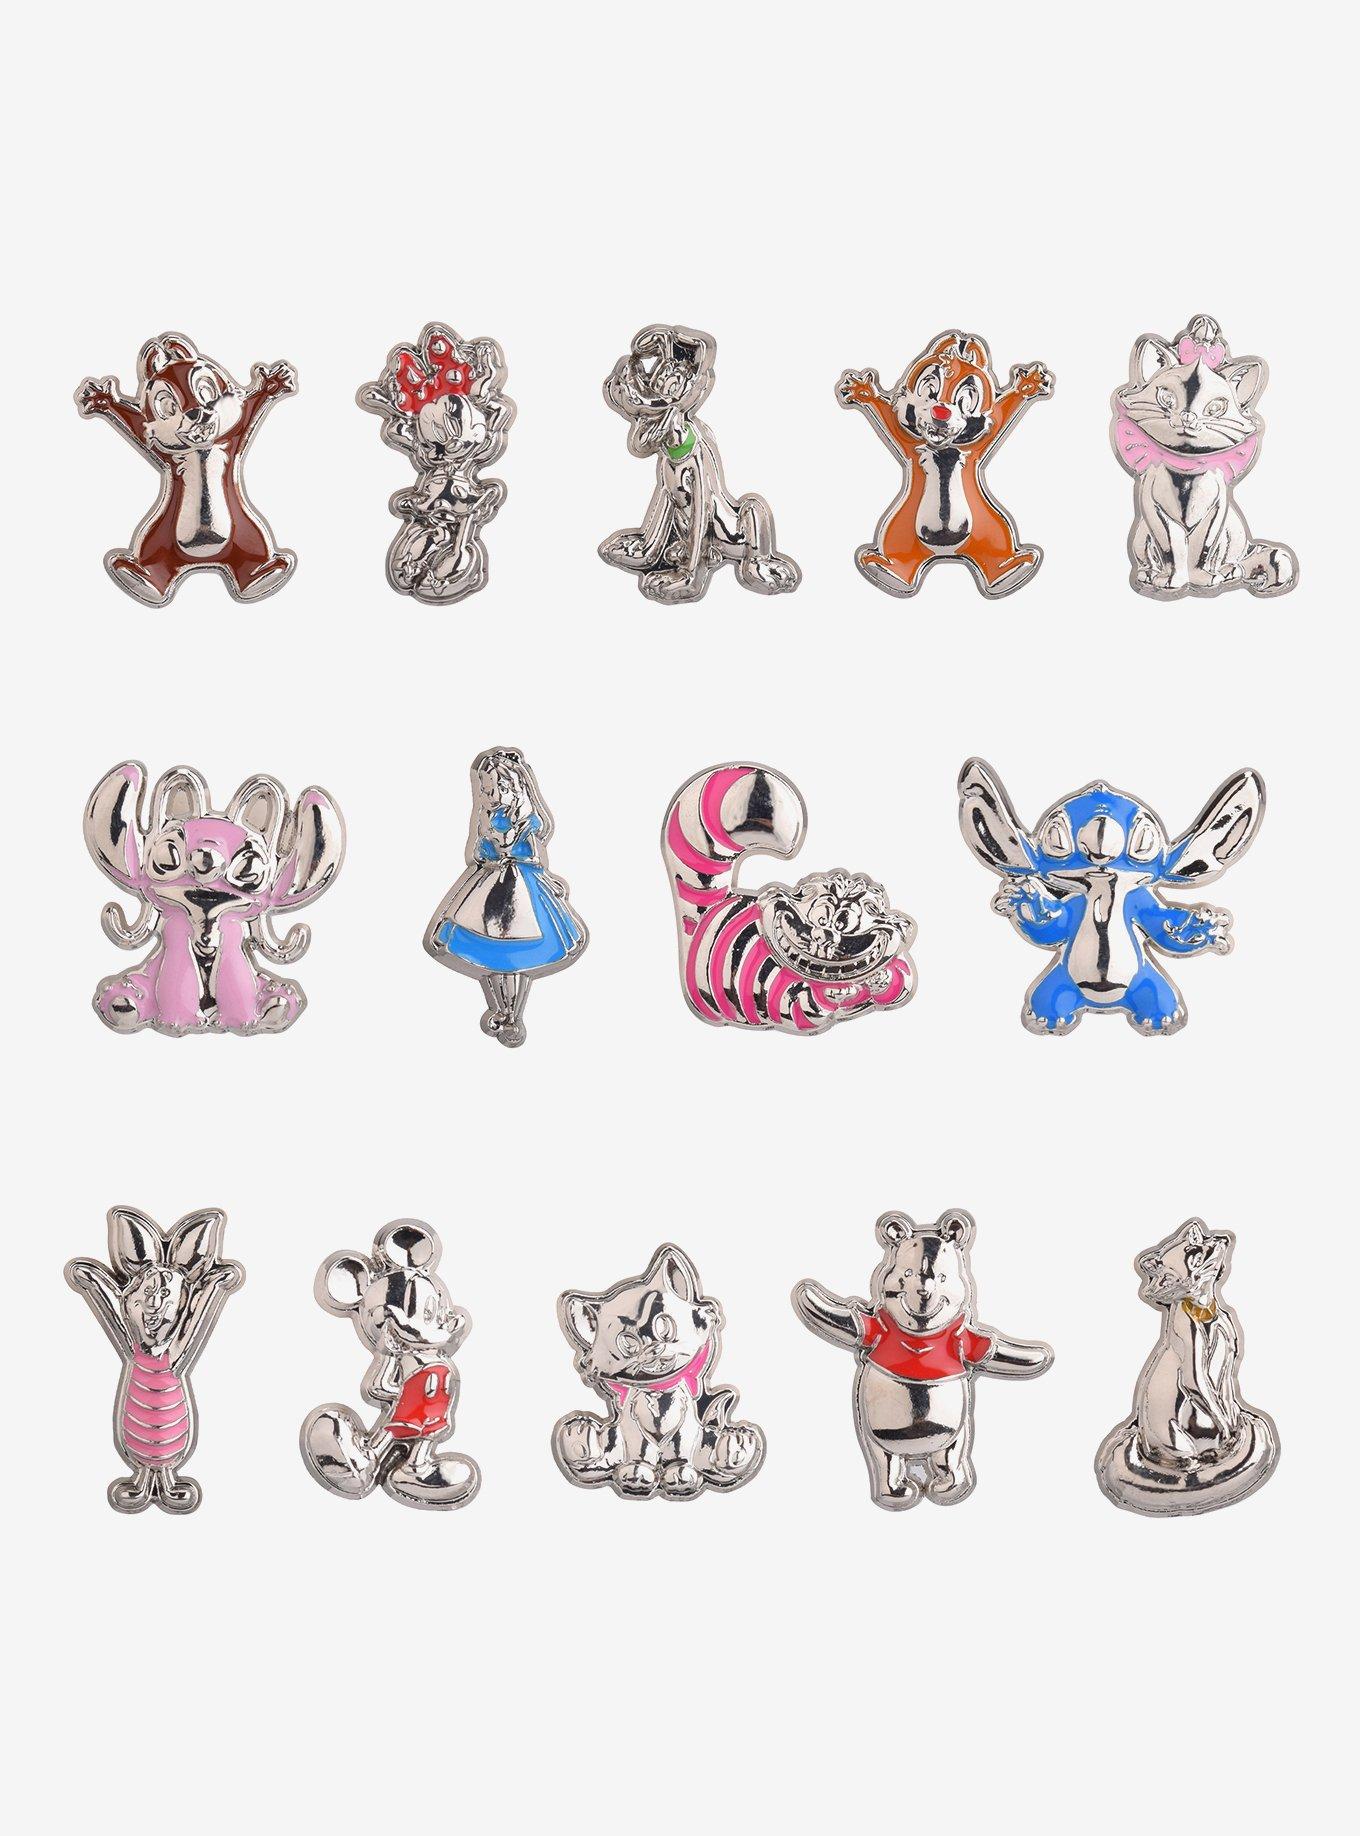 Disney100 Characters 2 Pack Blind Box Mini Pins - BoxLunch Exclusive